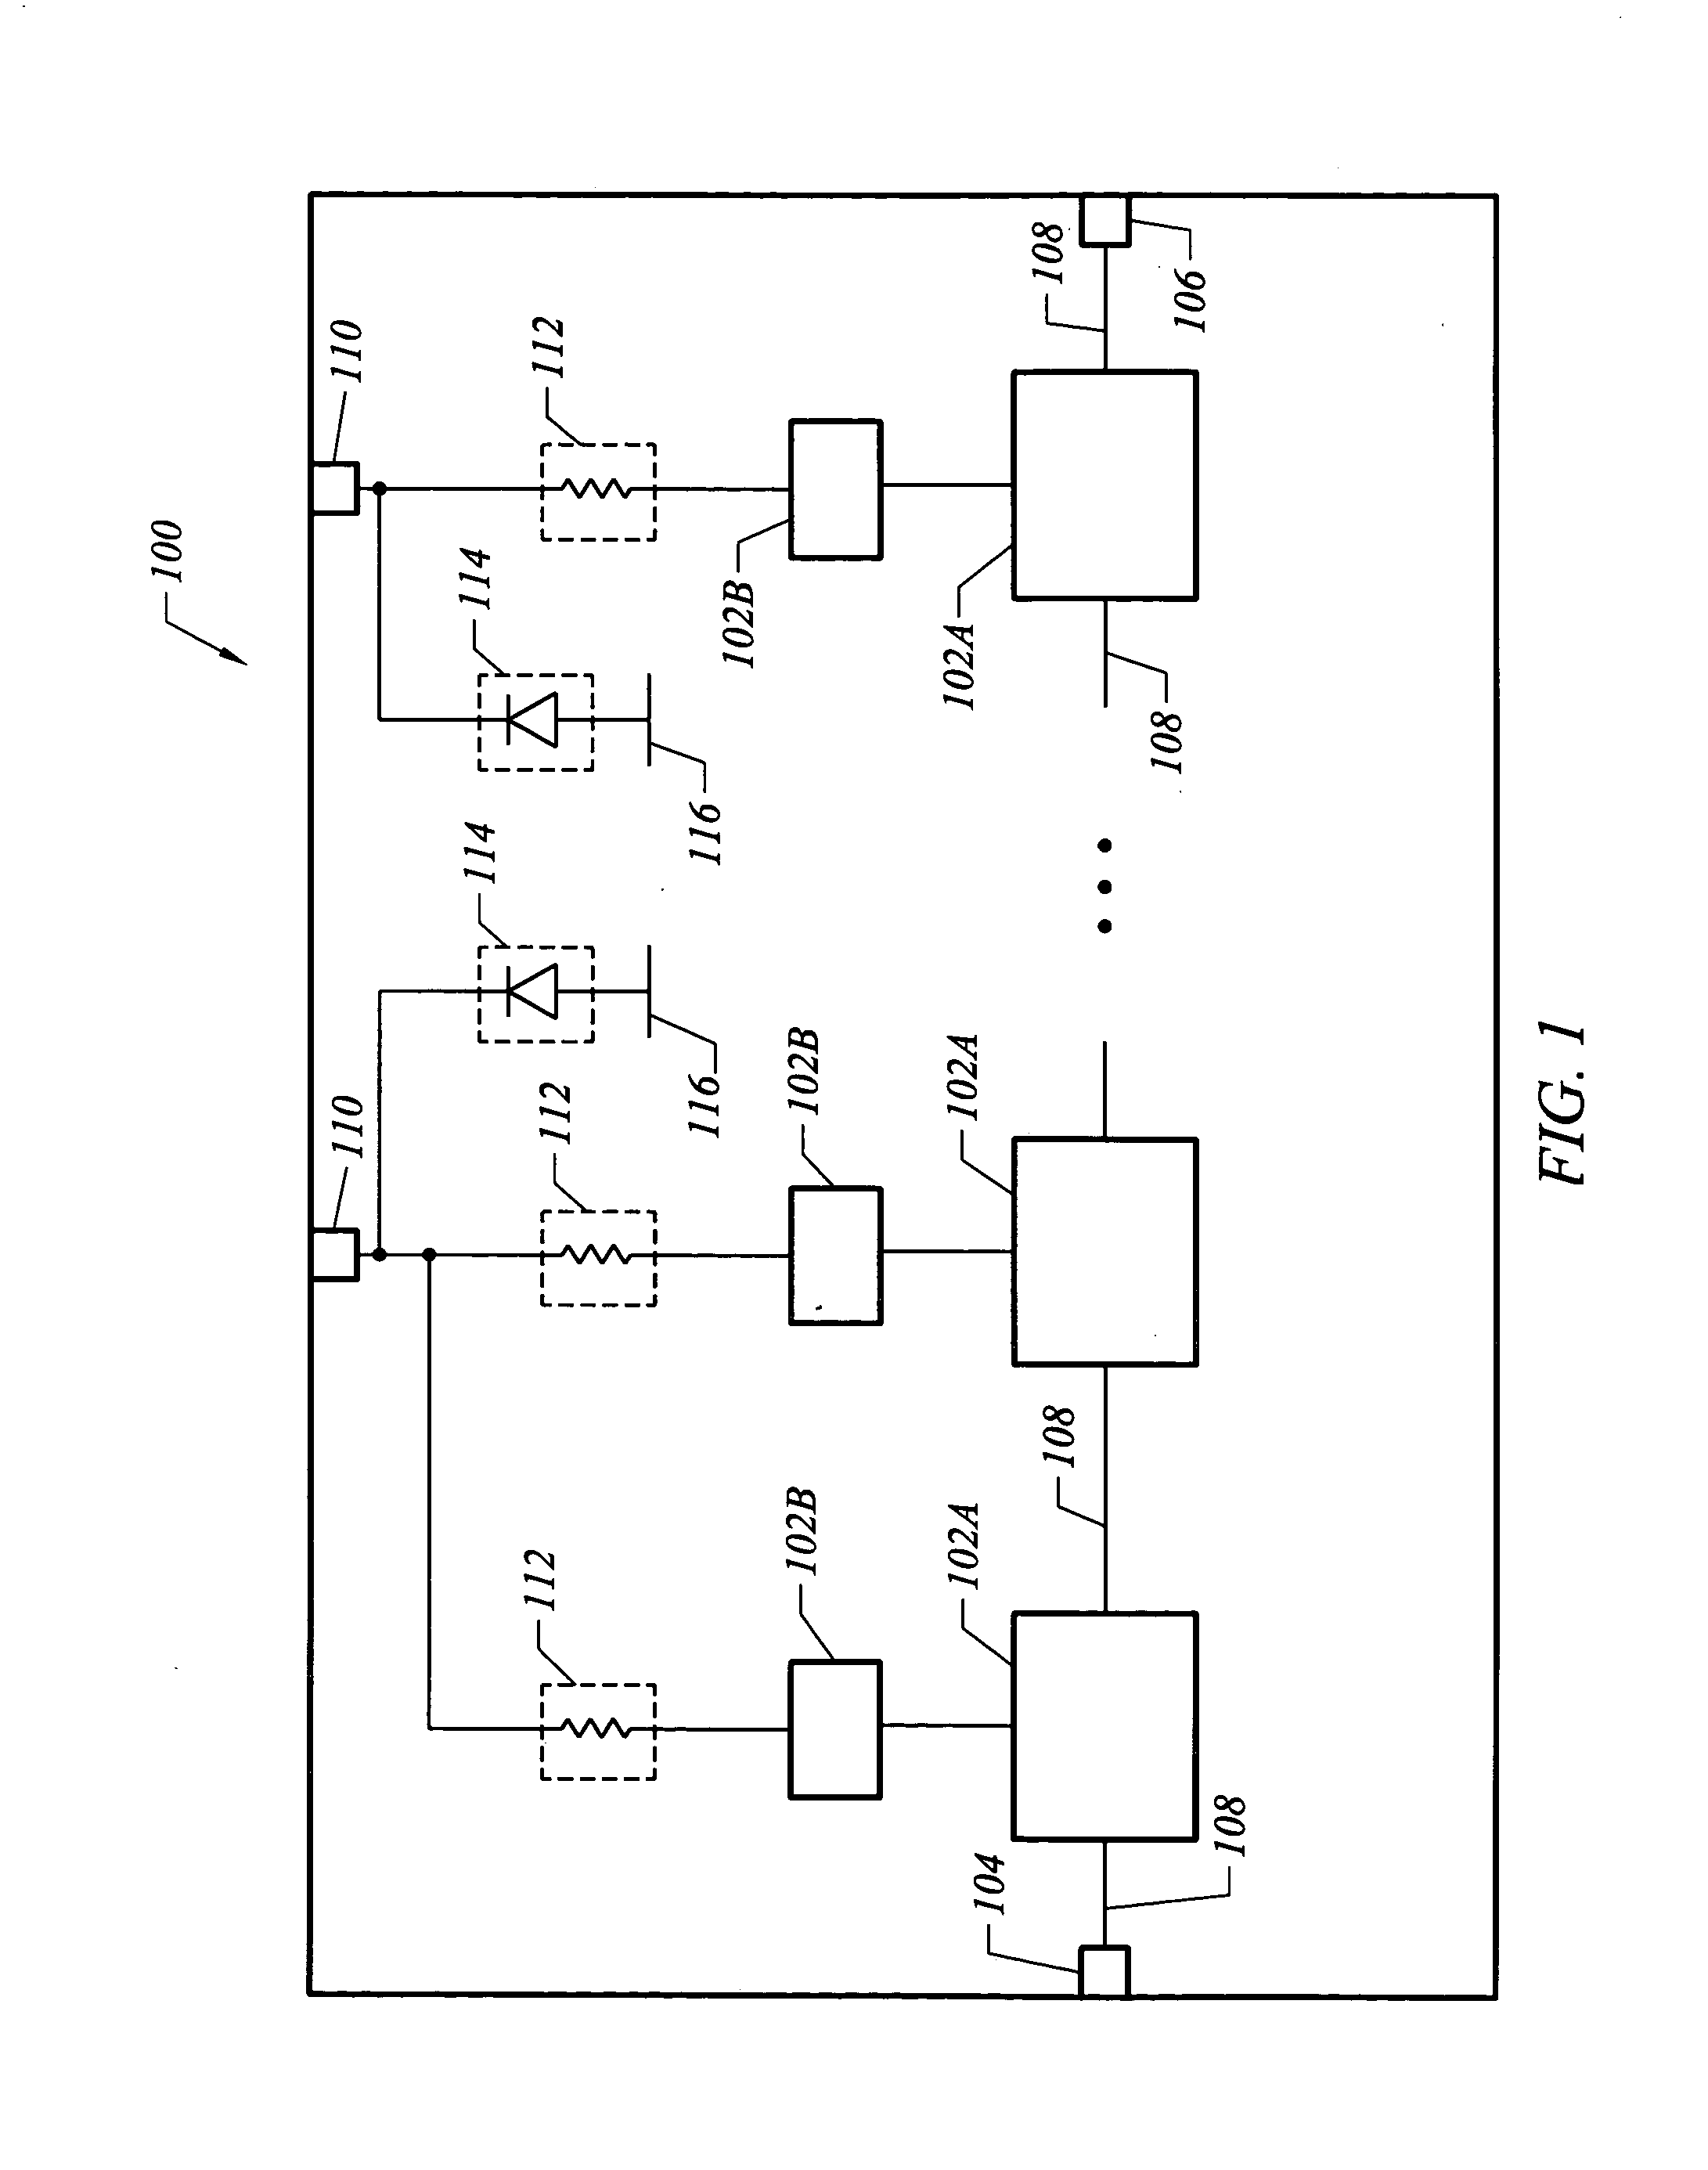 Integrated circuit with enhancement mode pseudomorphic high electron mobility transistors having on-chip electrostatic discharge protection